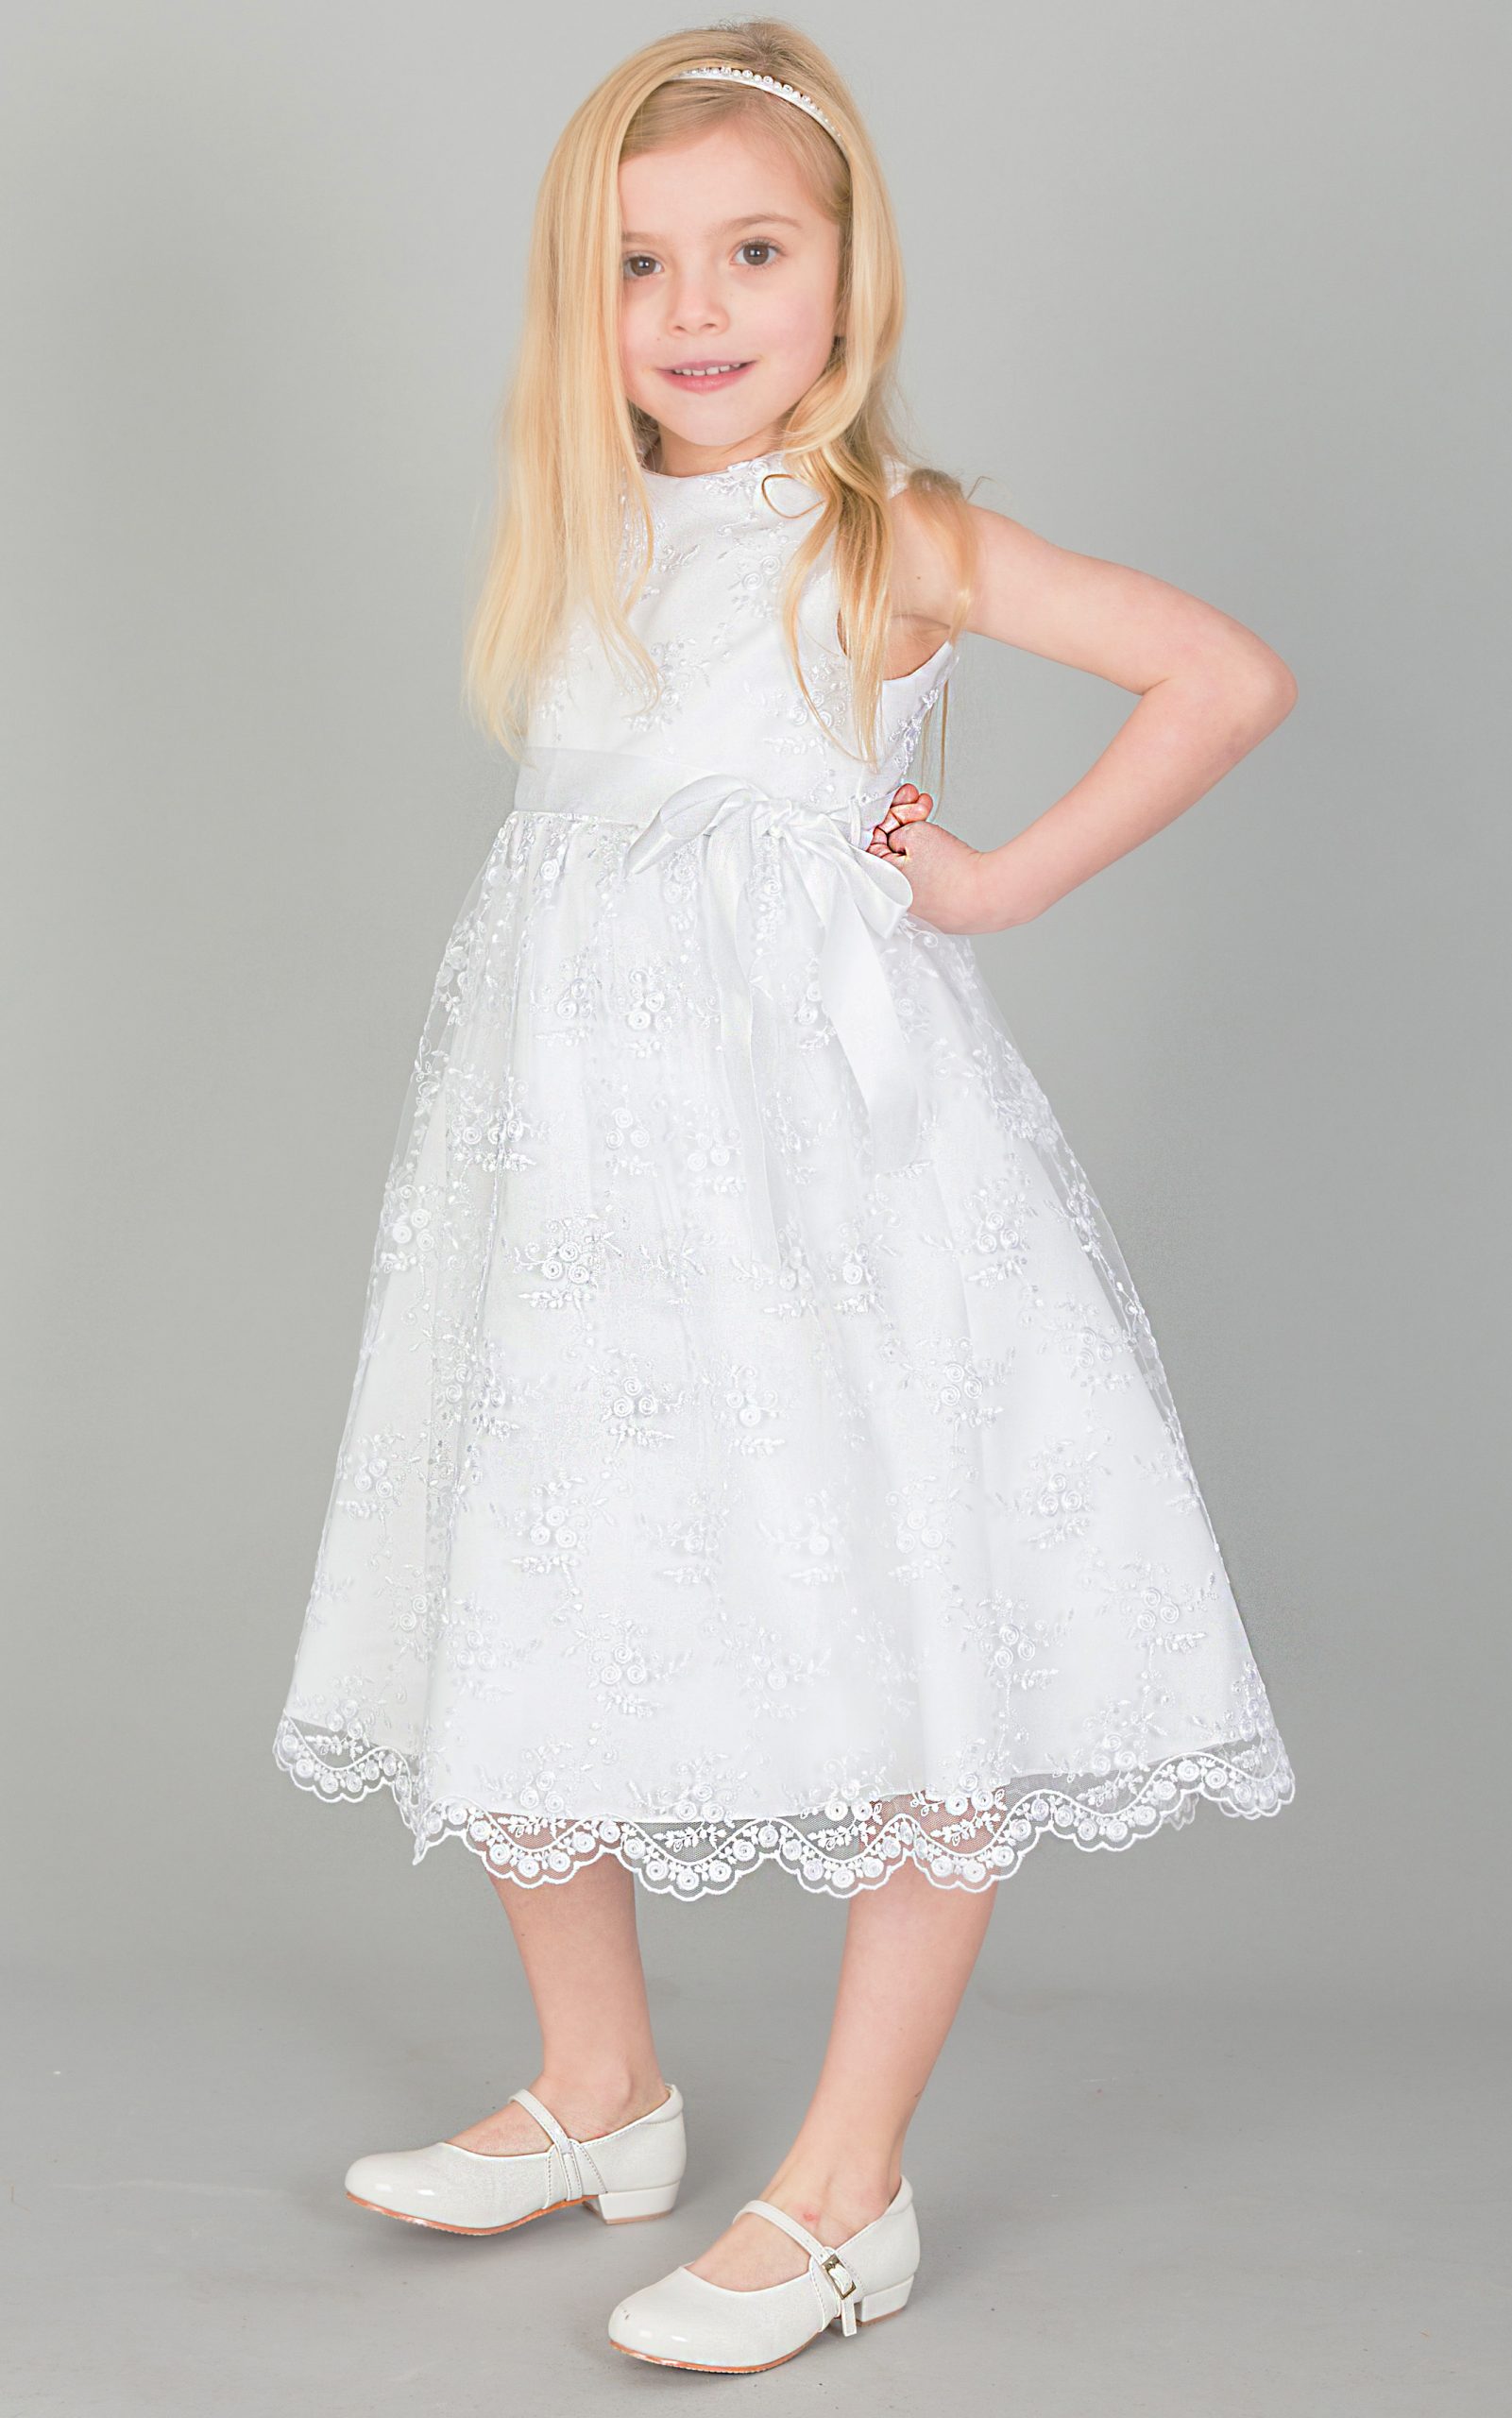 Girls Lace dress with Bow in WHITE | Little Giants Ltd